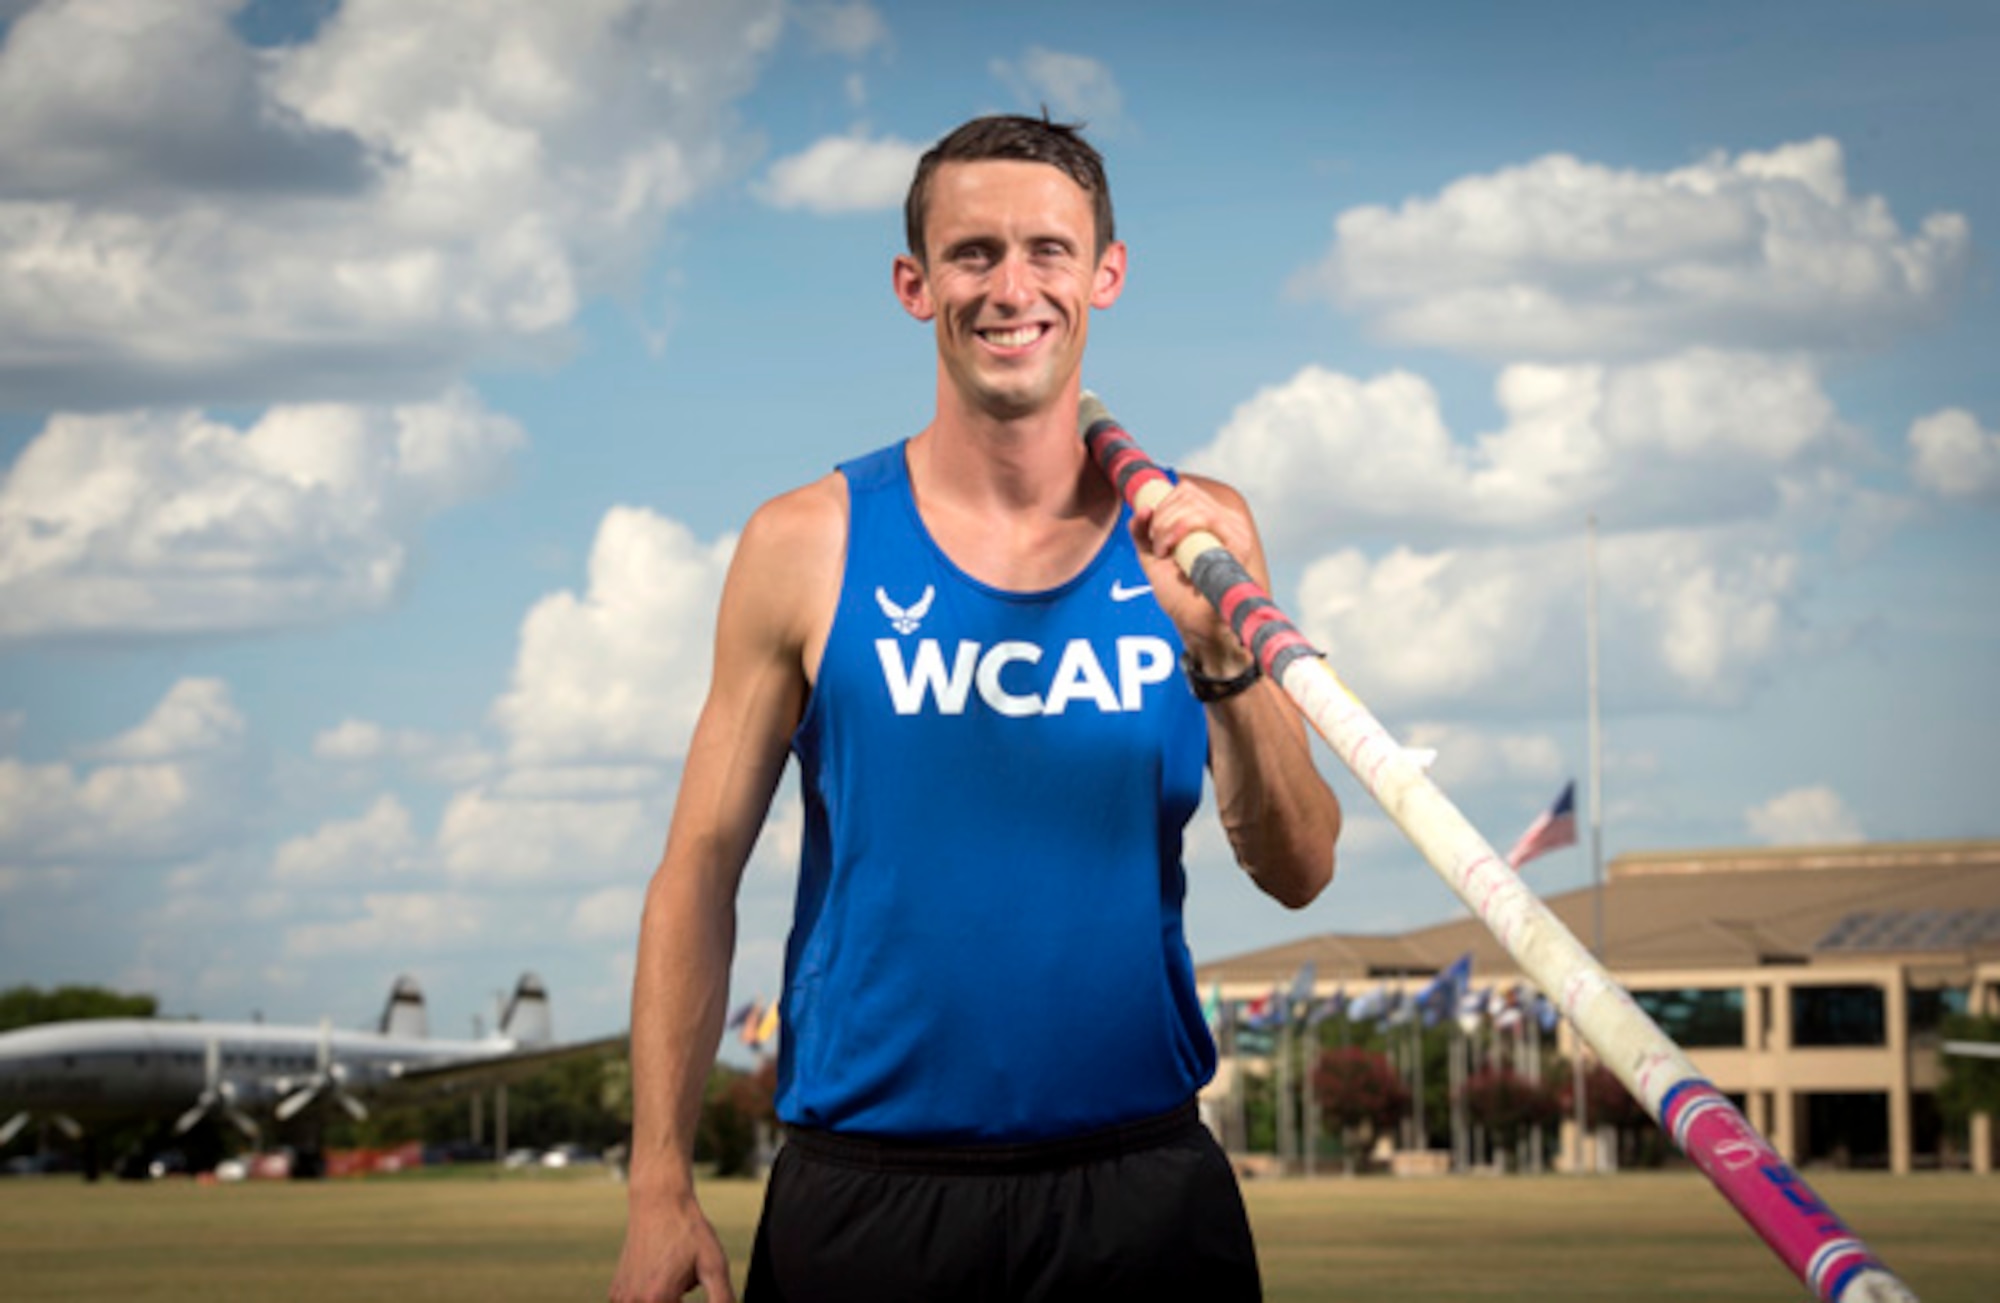 1st Lt. Cale Simmons, a member of the World Class Athlete Program from August 2015-October 2016, said qualifying for the 2016 Olympics was one of the most memorable moments of his life. “I was happy and proud to represent the service, as I couldn’t have done it without the resiliency instilled within me throughout the years,” Simmons said. (U.S. Air Force photo by Staff Sgt. Cory D. Payne)